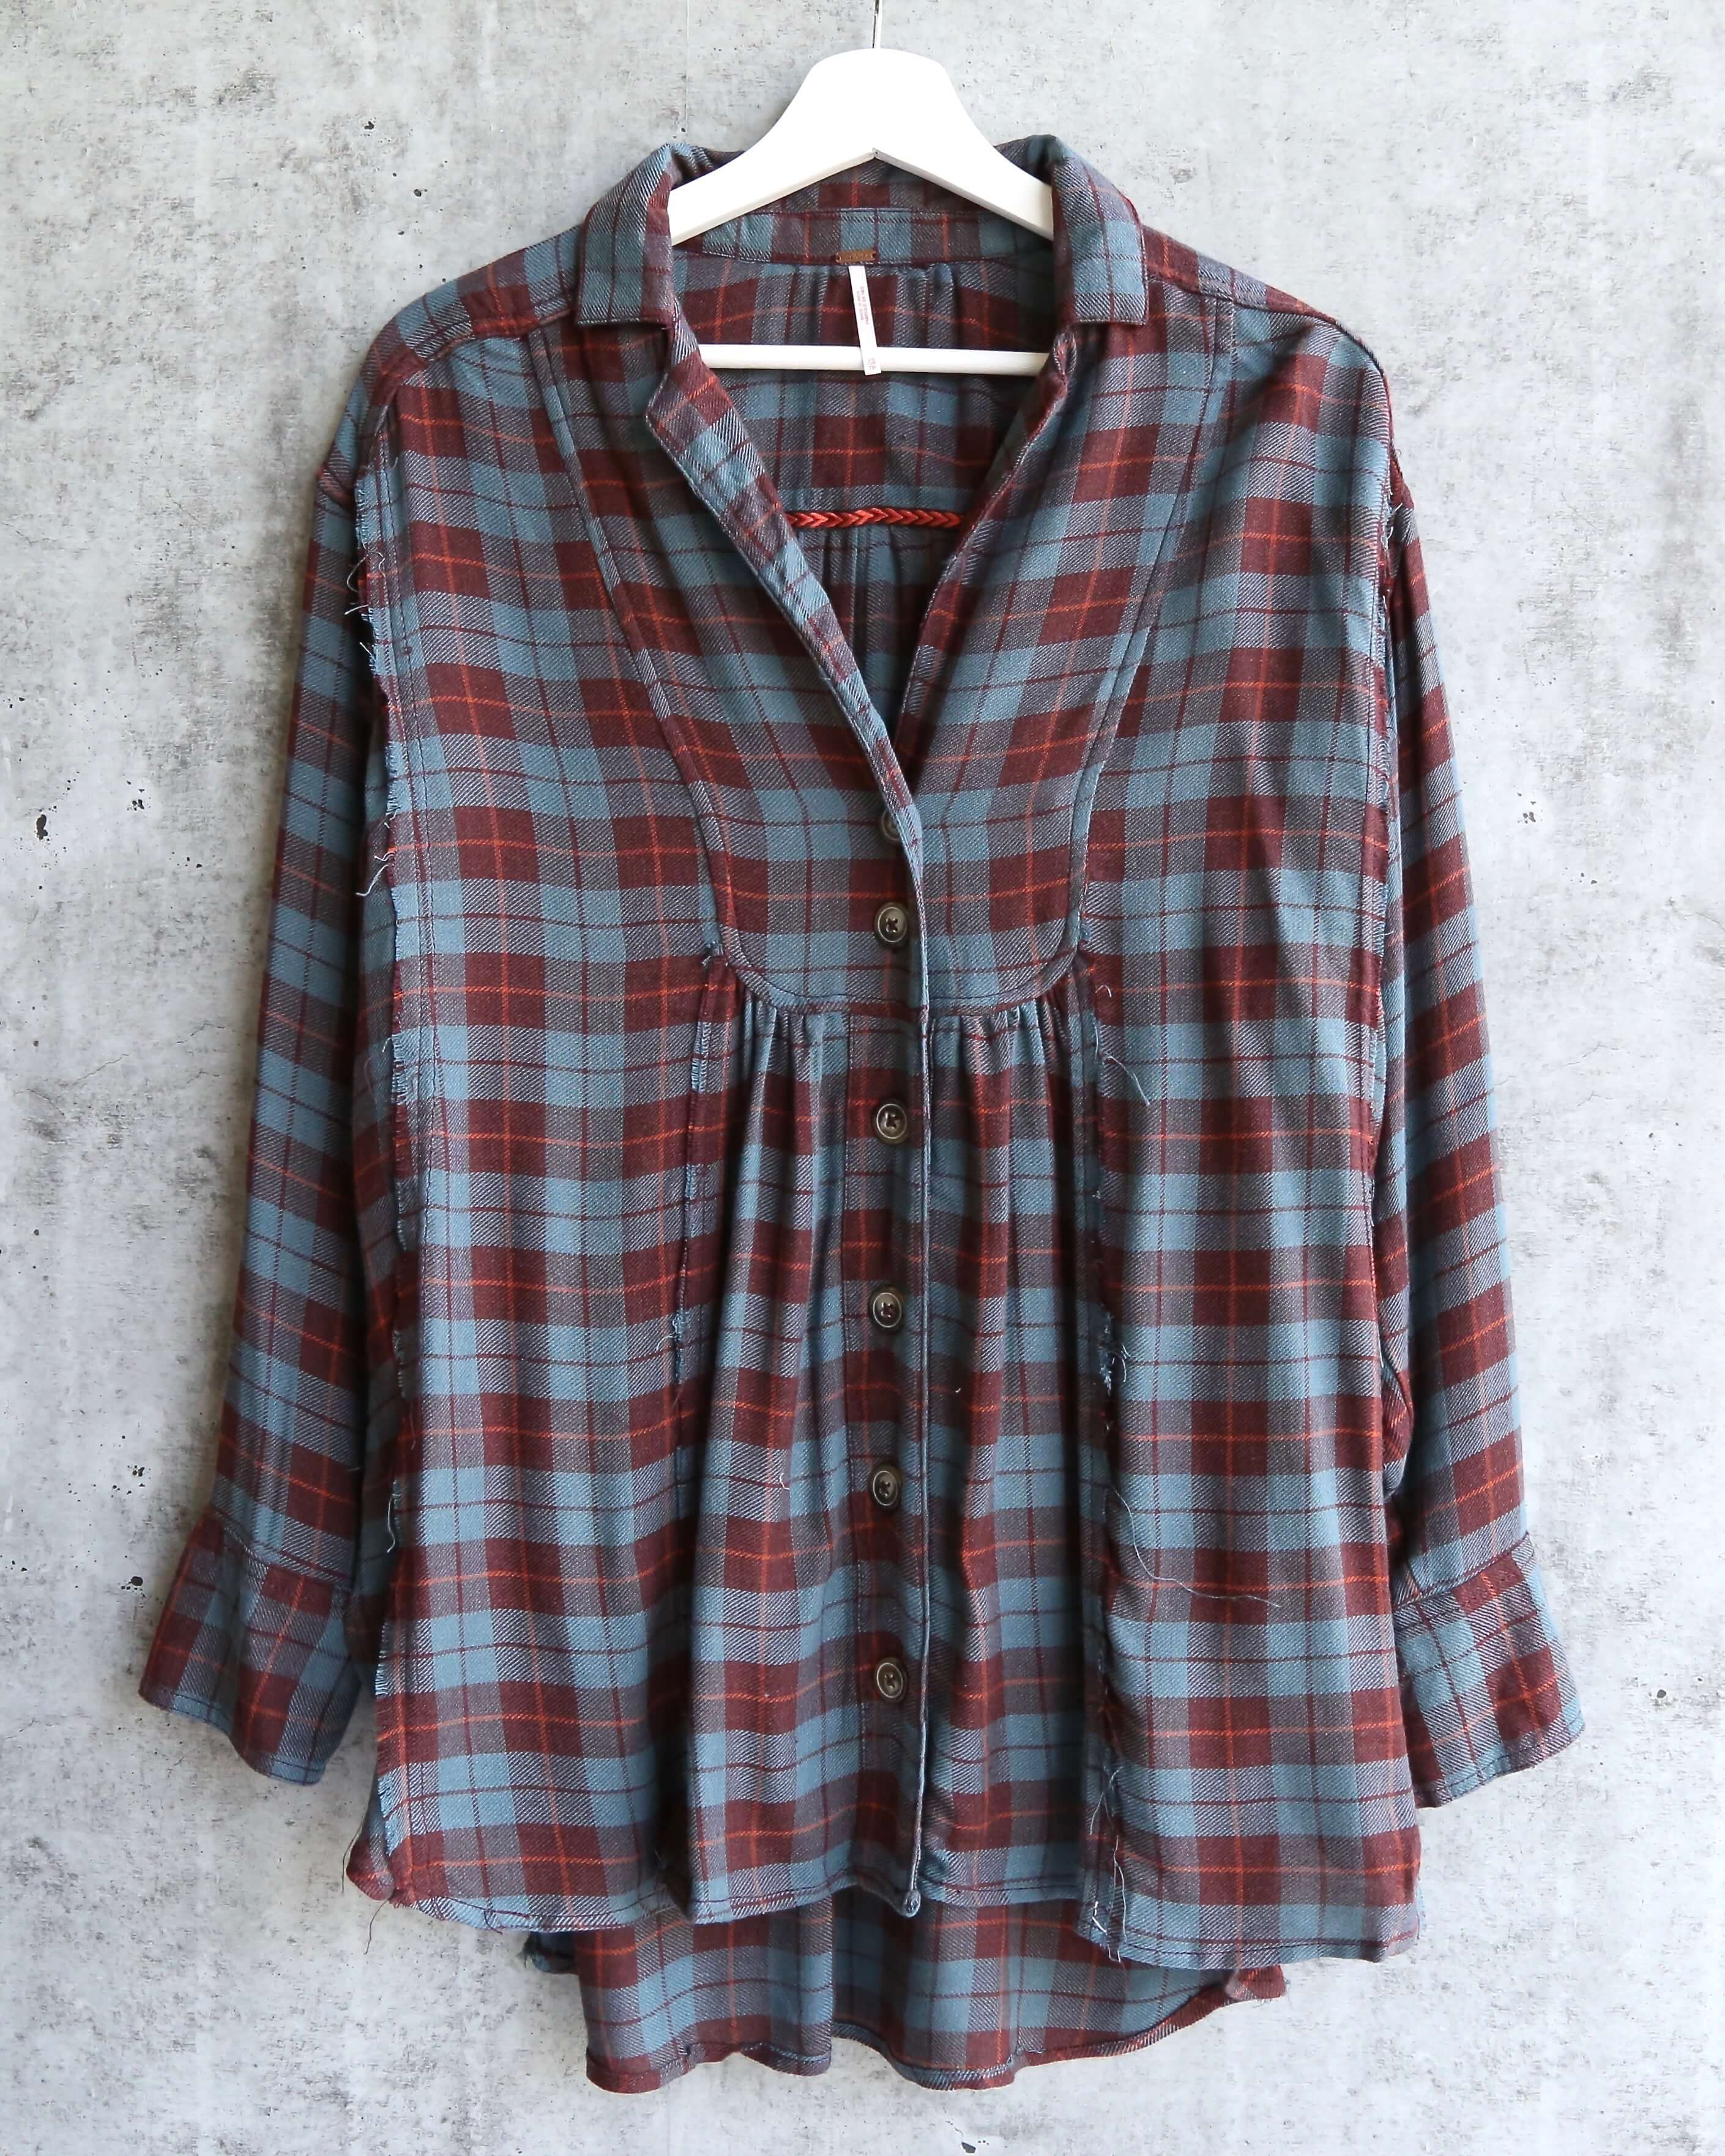 Free People - All About The Feels Plaid Button Down Top - Aubergine ...